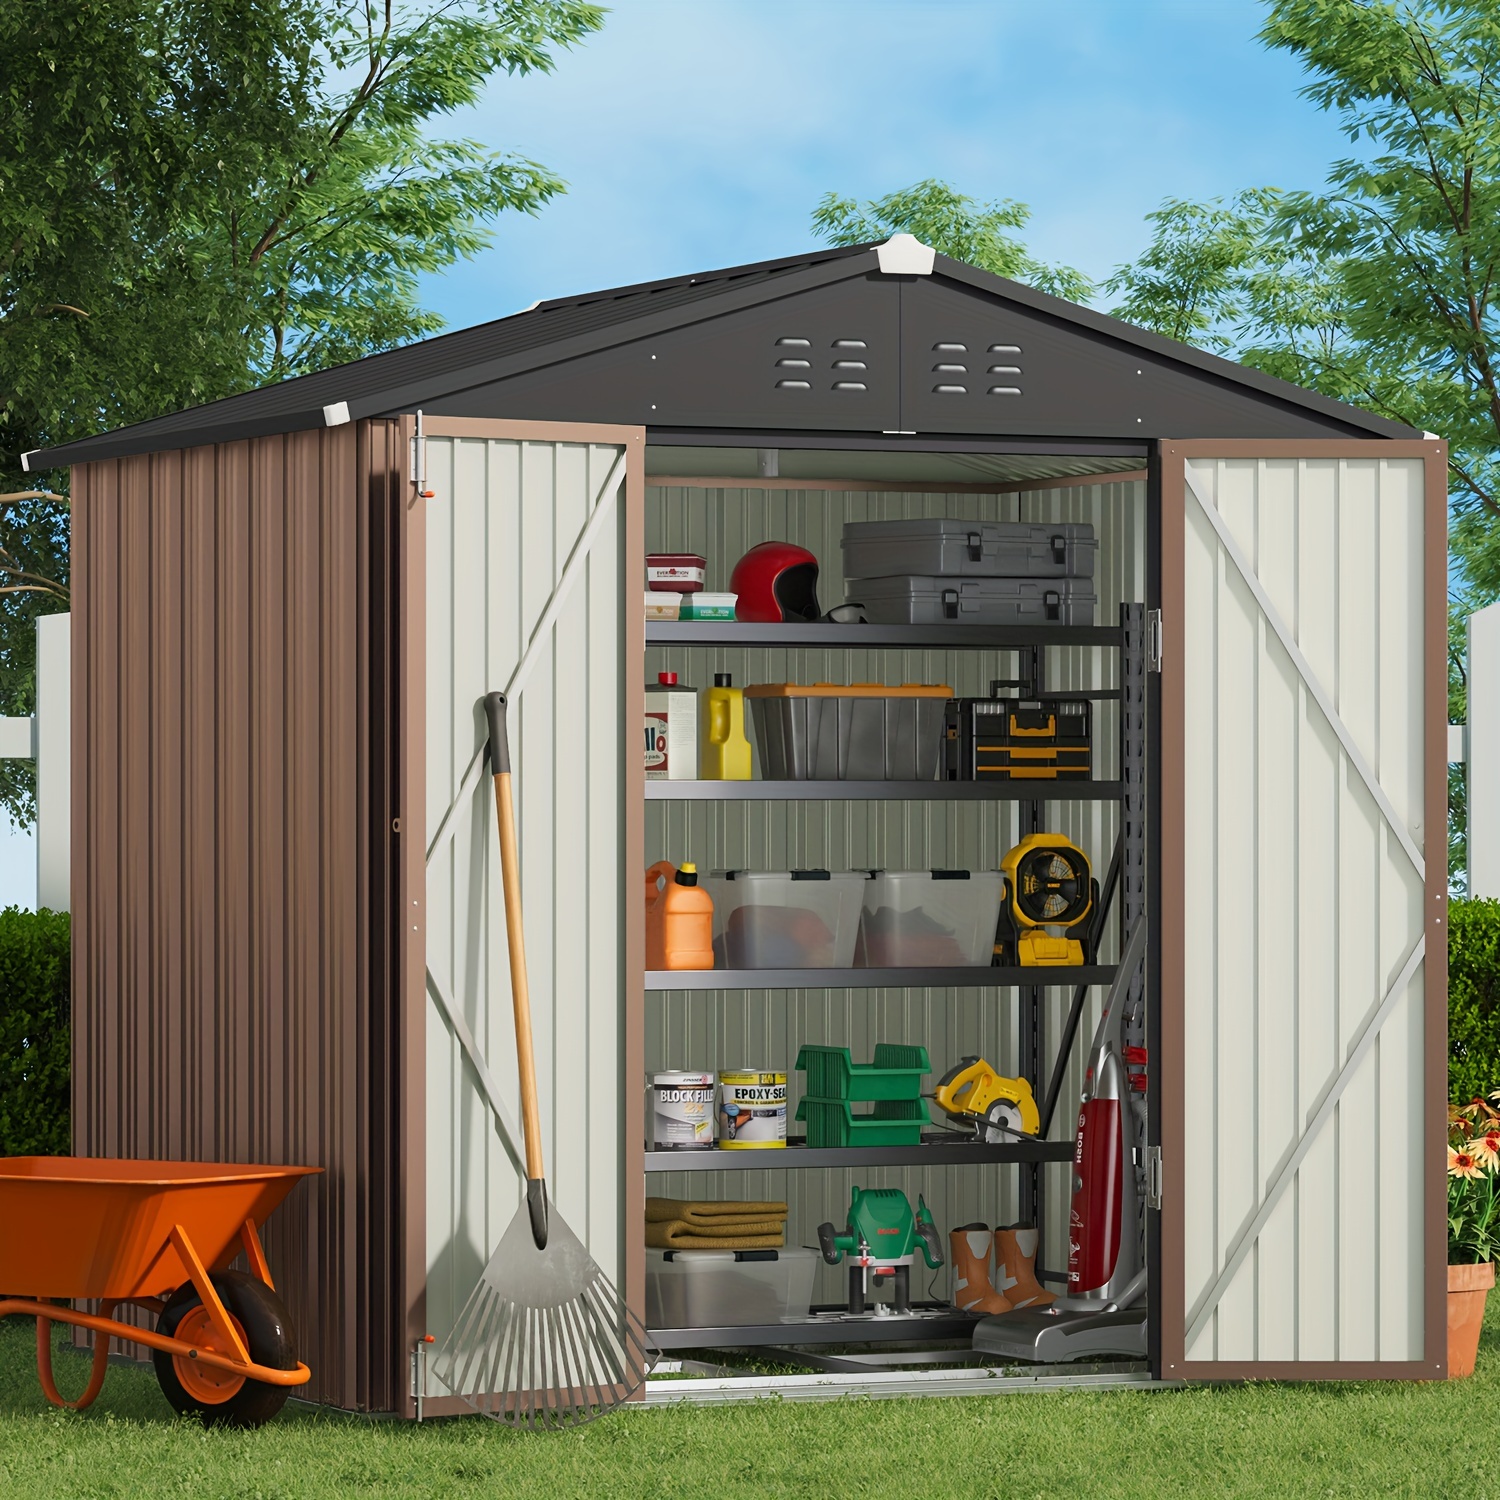 

8 X 6 Ft Outdoor Storage Shed With Metal Base Frame, Garden Metal Shed With Double Lockable Doors And Air Vents For Patio, Garden, Backyard, Lawn, Brown